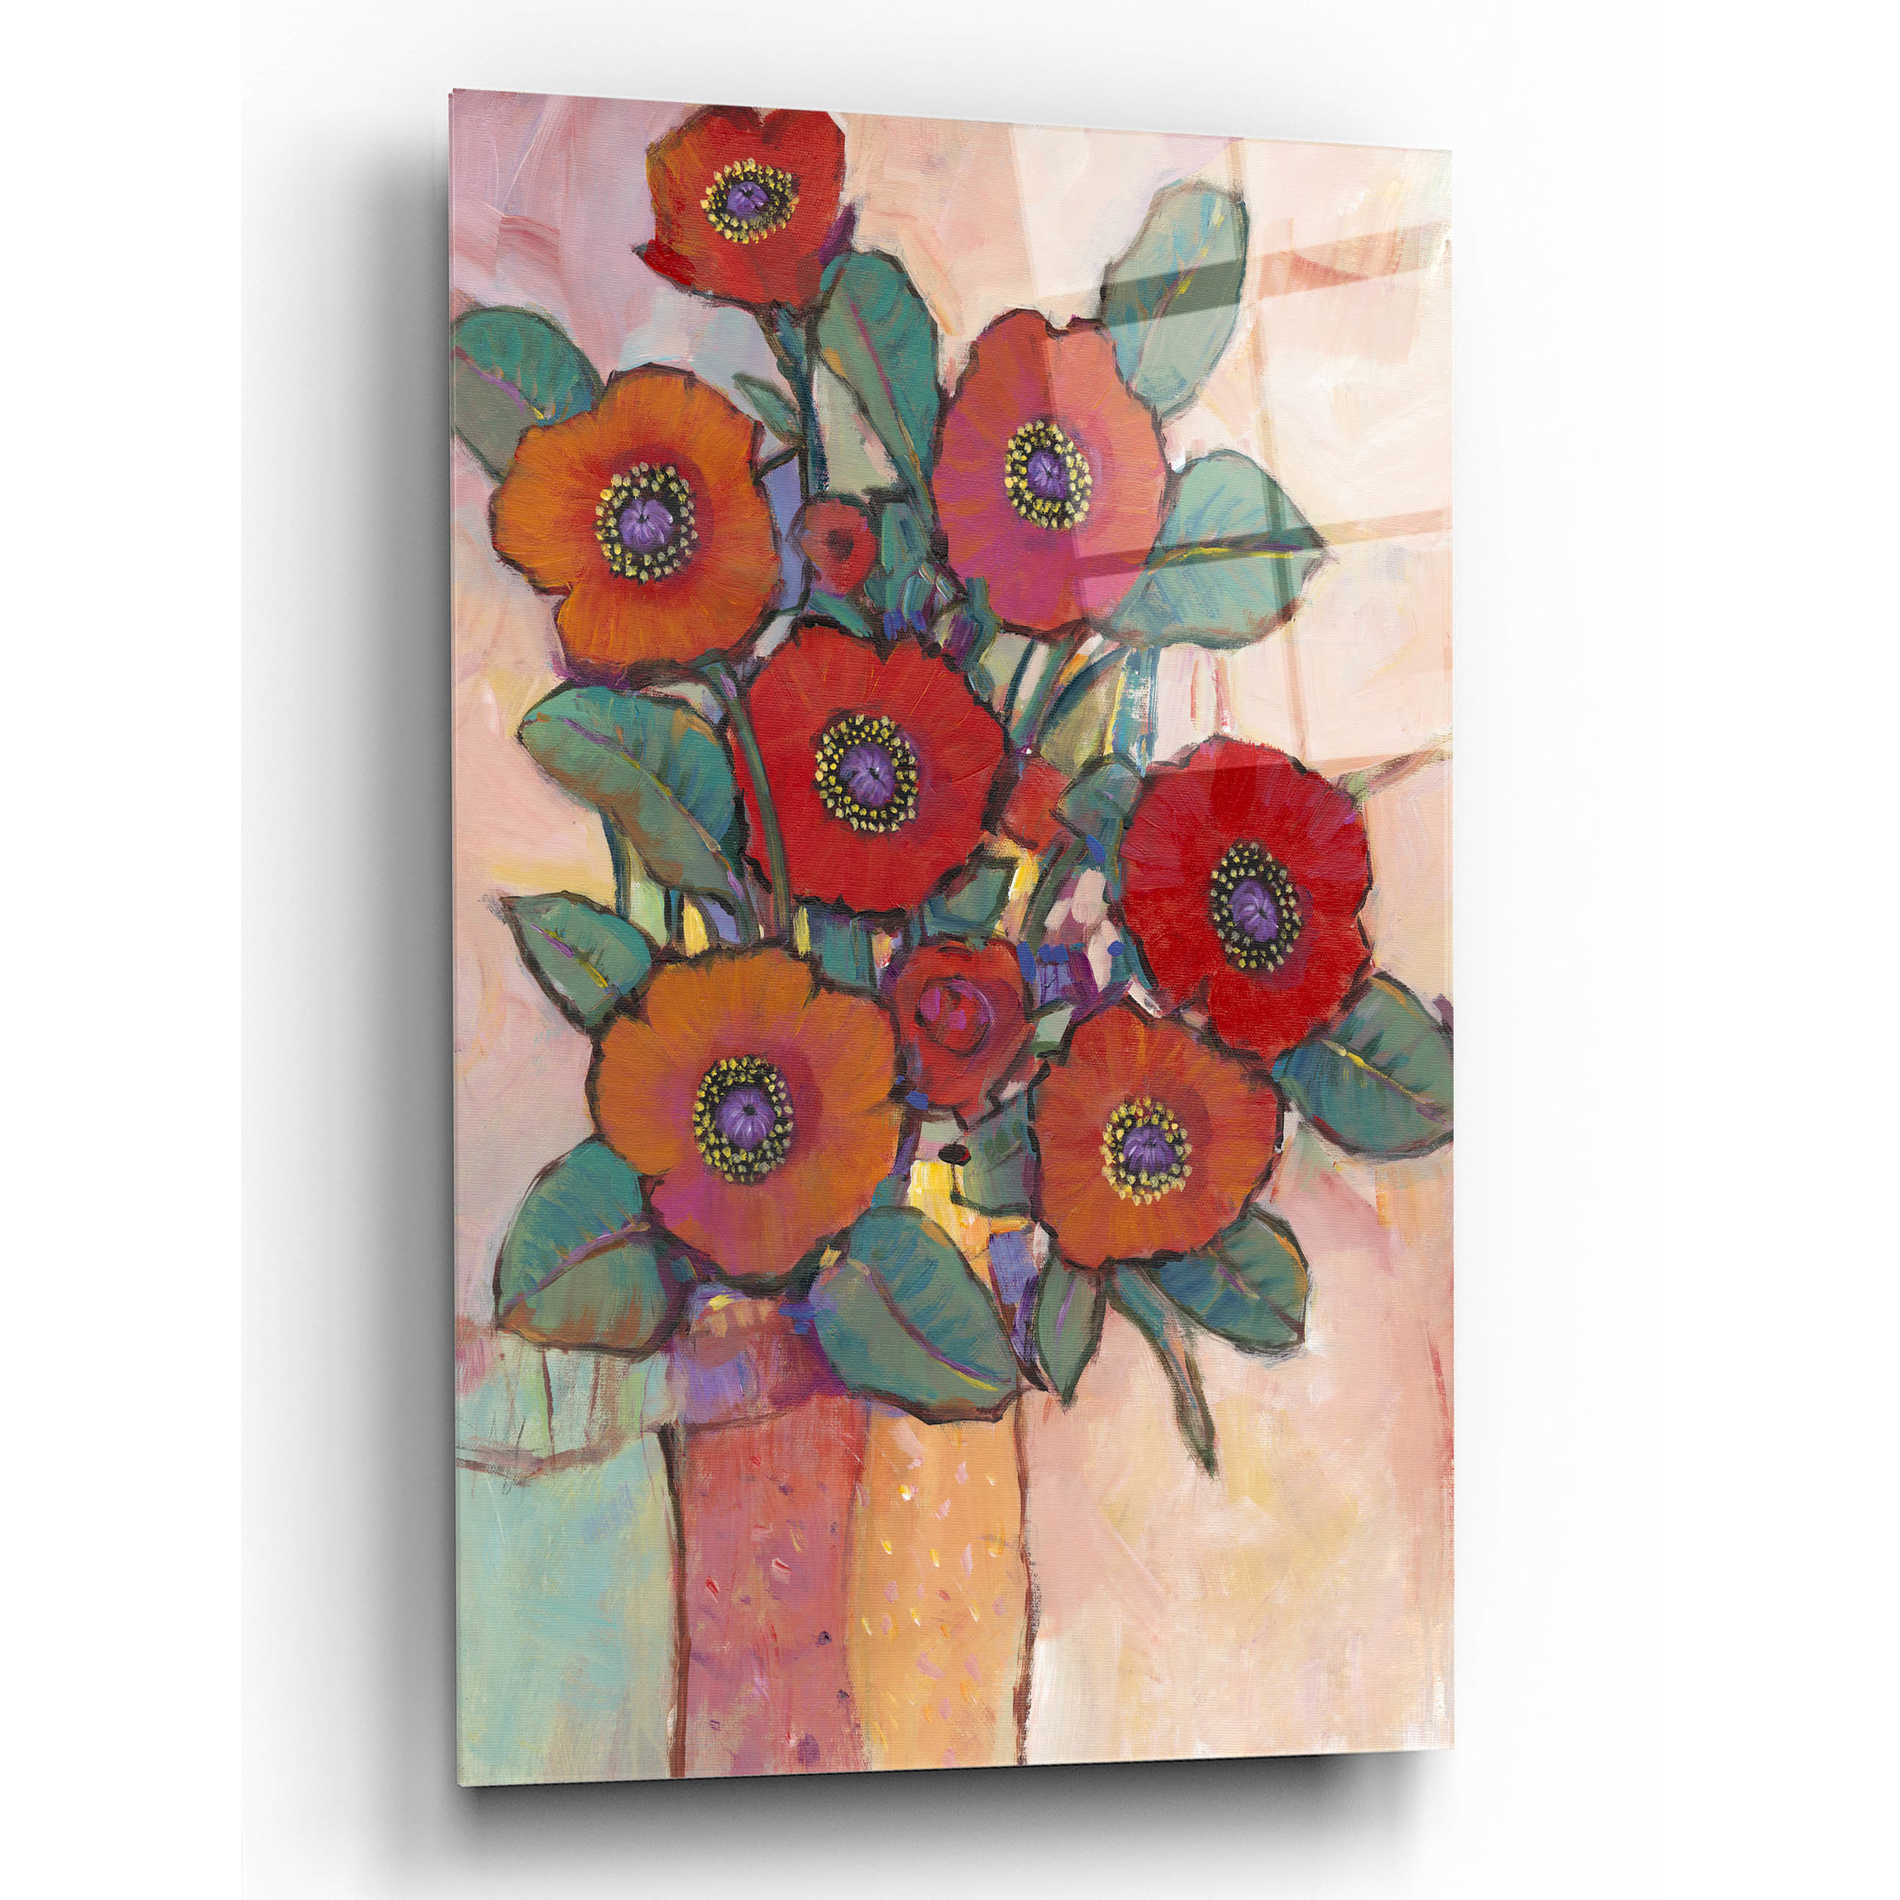 Epic Art 'Poppies in a Vase I' by Tim O'Toole, Acrylic Glass Wall Art,12x16